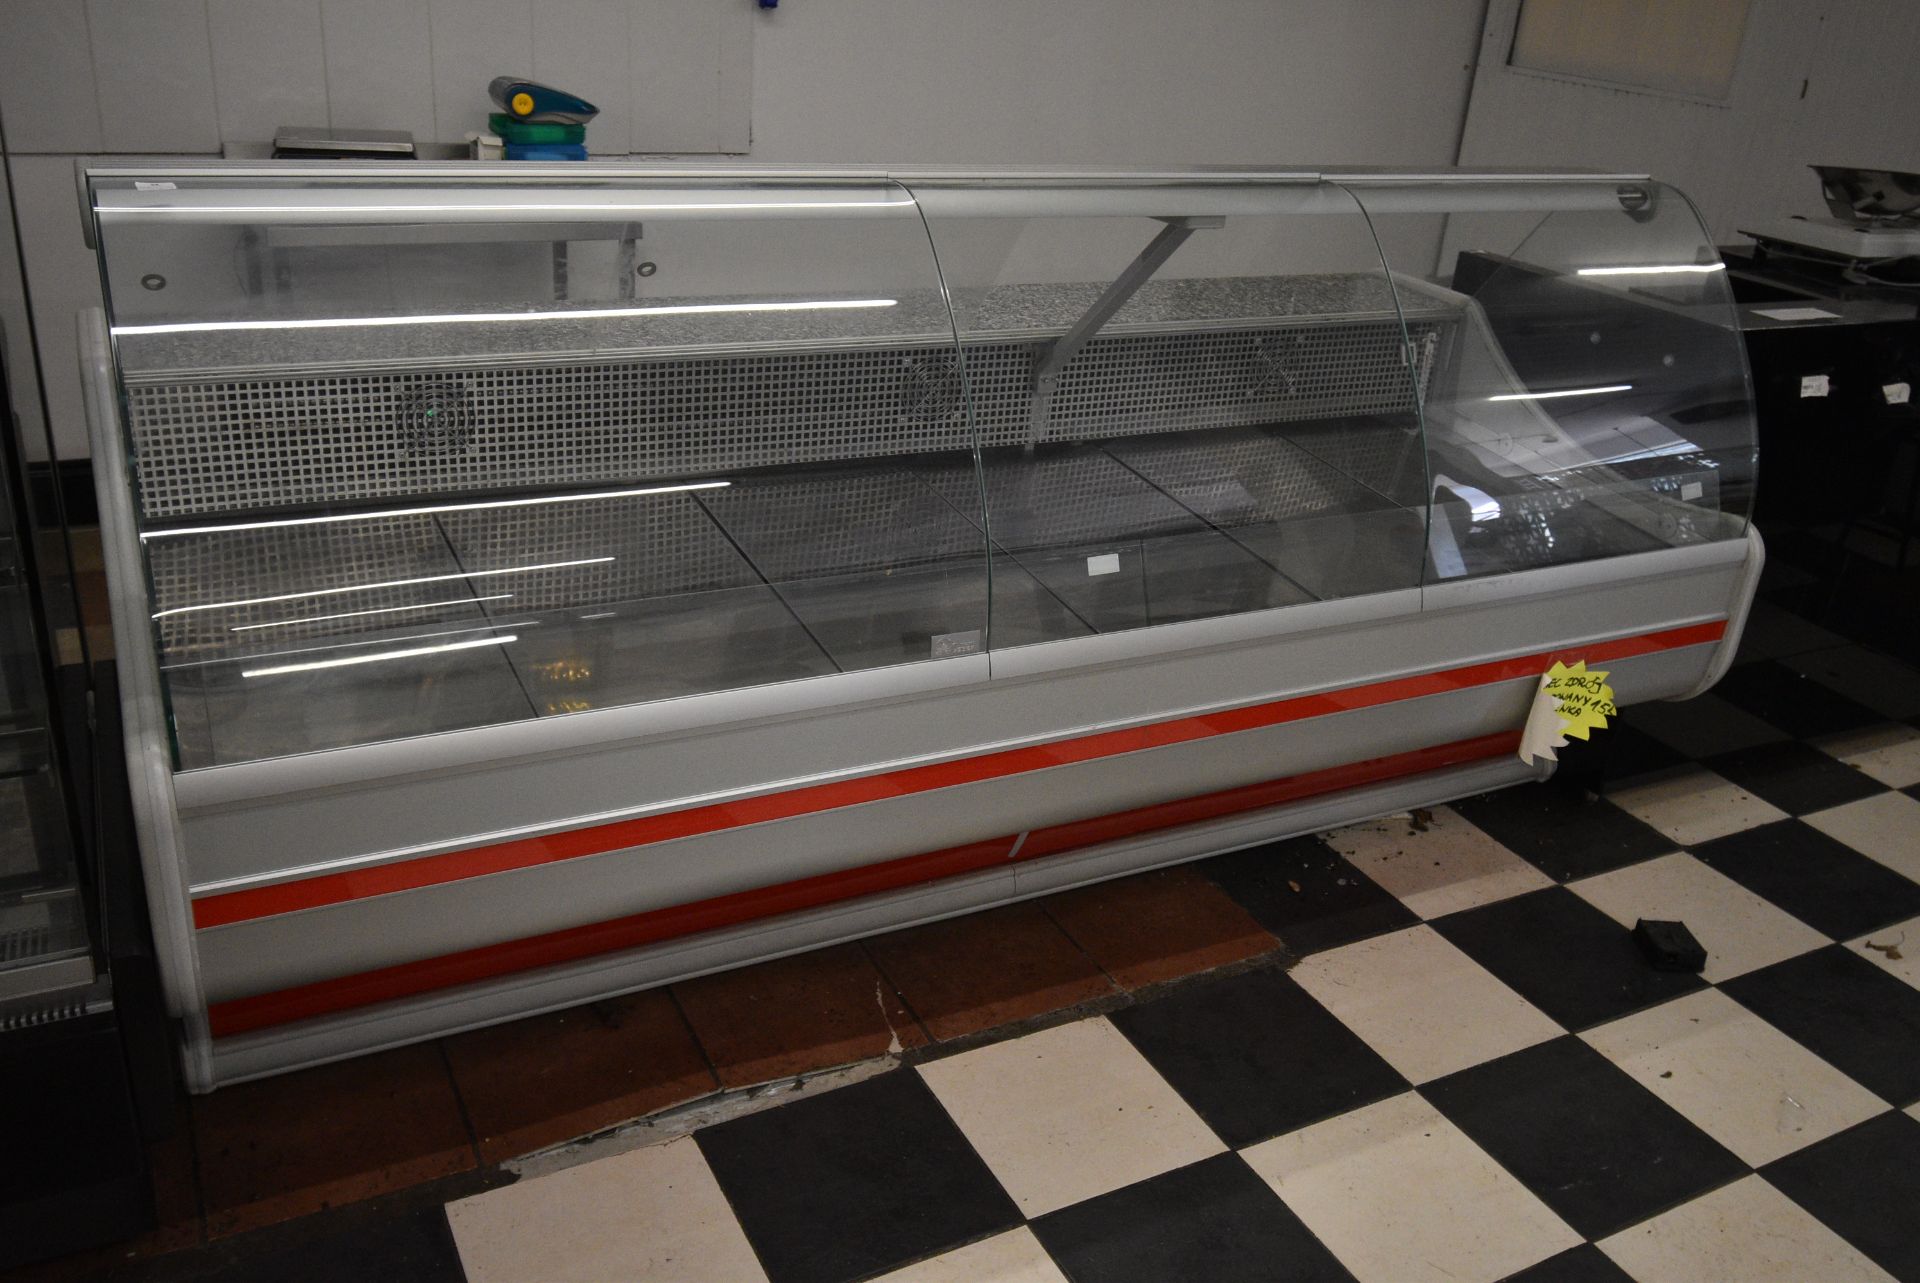 Bochnia Cebea Refrigerated Serve Over Display Counter Model WCH-16/1B WEGA, Year of Manufacture